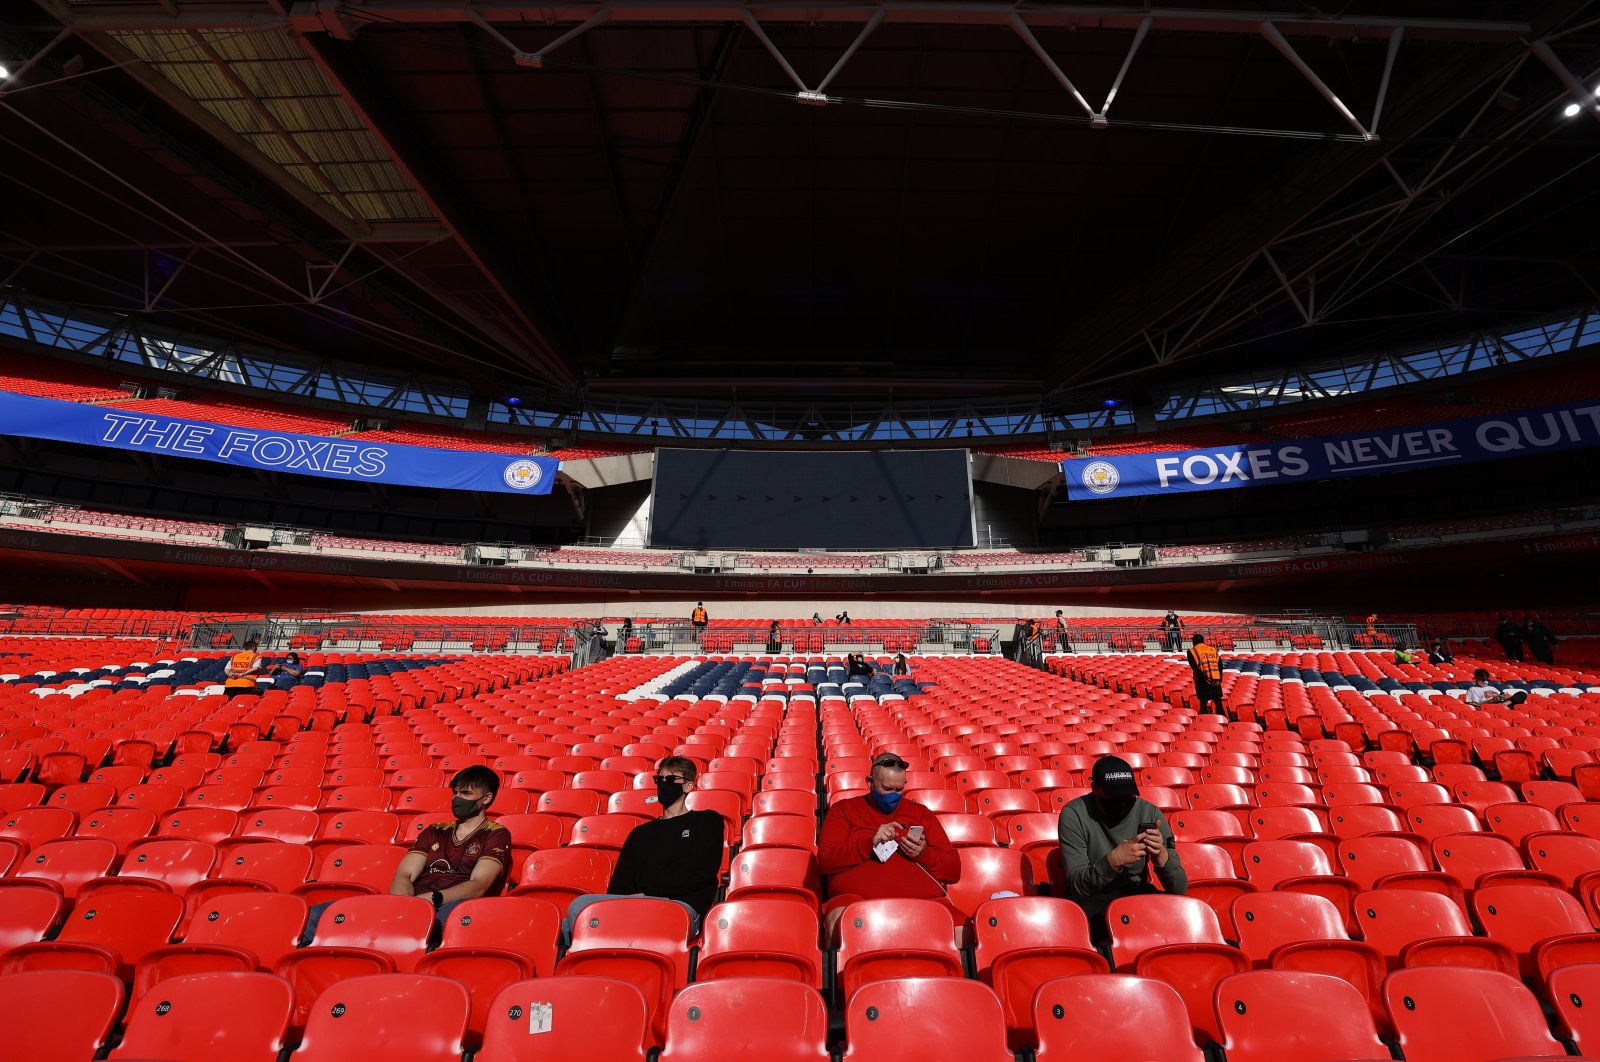 Supporters sit in the stands of the Wembley Stadium before the start of the FA Cup semifinal match between Leicester City and Southampton as thousands of fans returned to the stands as part of the COVID-19 events trial, U.K., April 18, 2021. (Reuters Photo)